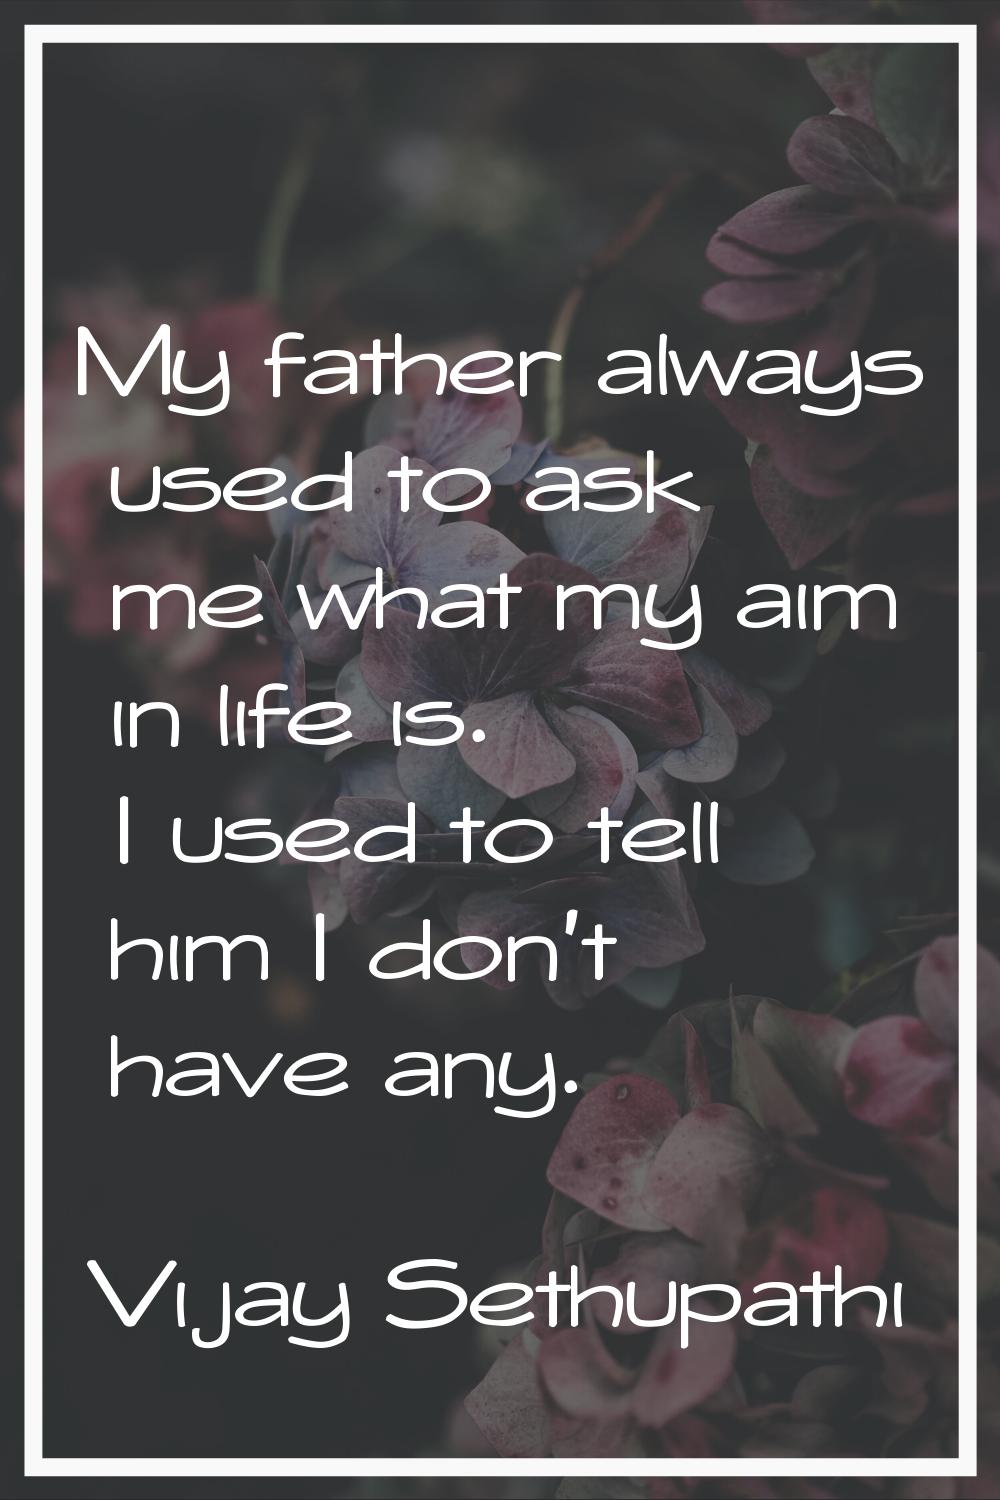 My father always used to ask me what my aim in life is. I used to tell him I don't have any.